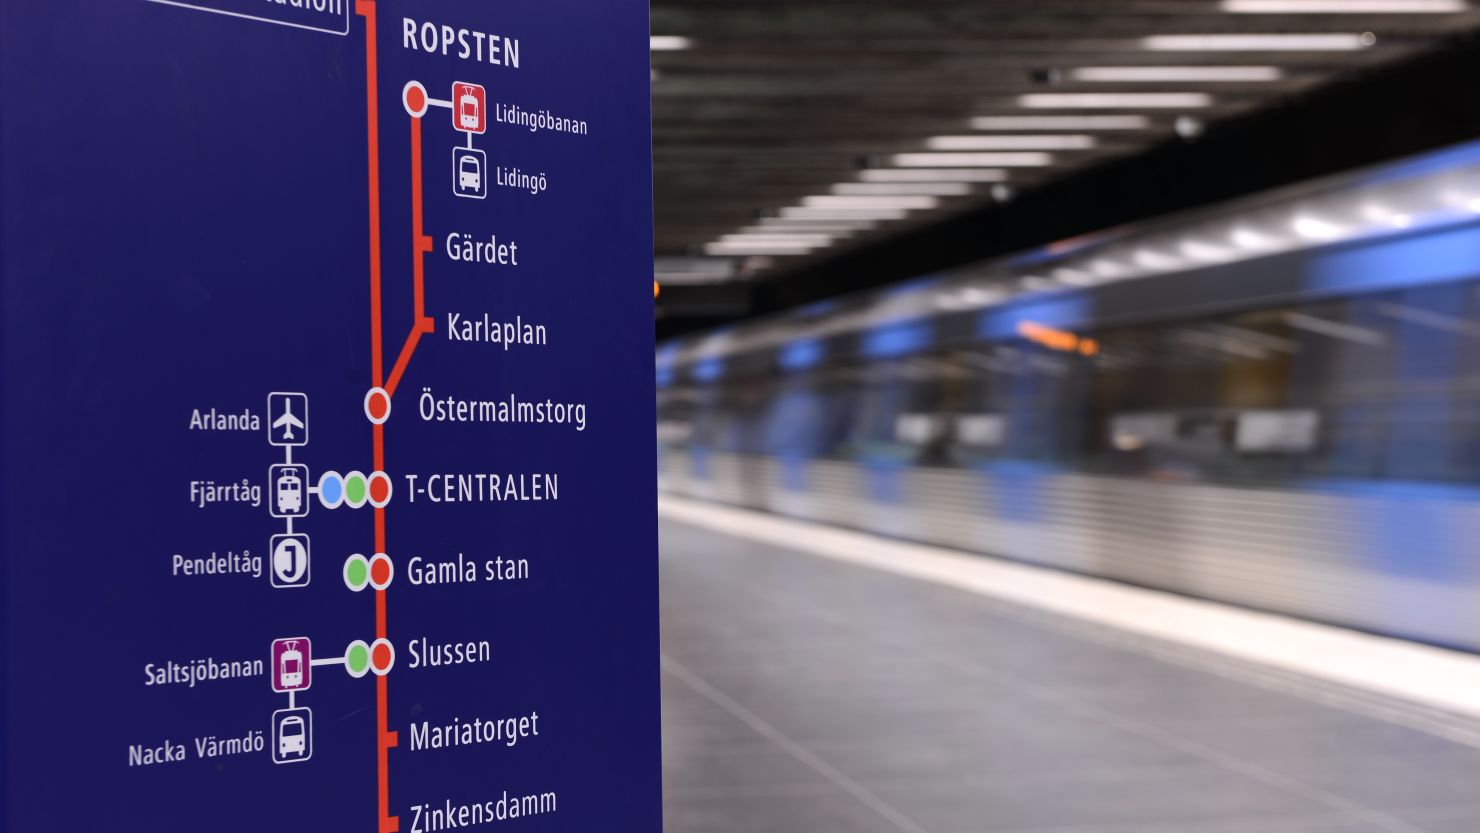 The incident occurred on a metro train in the Swedish capital, Stockholm.